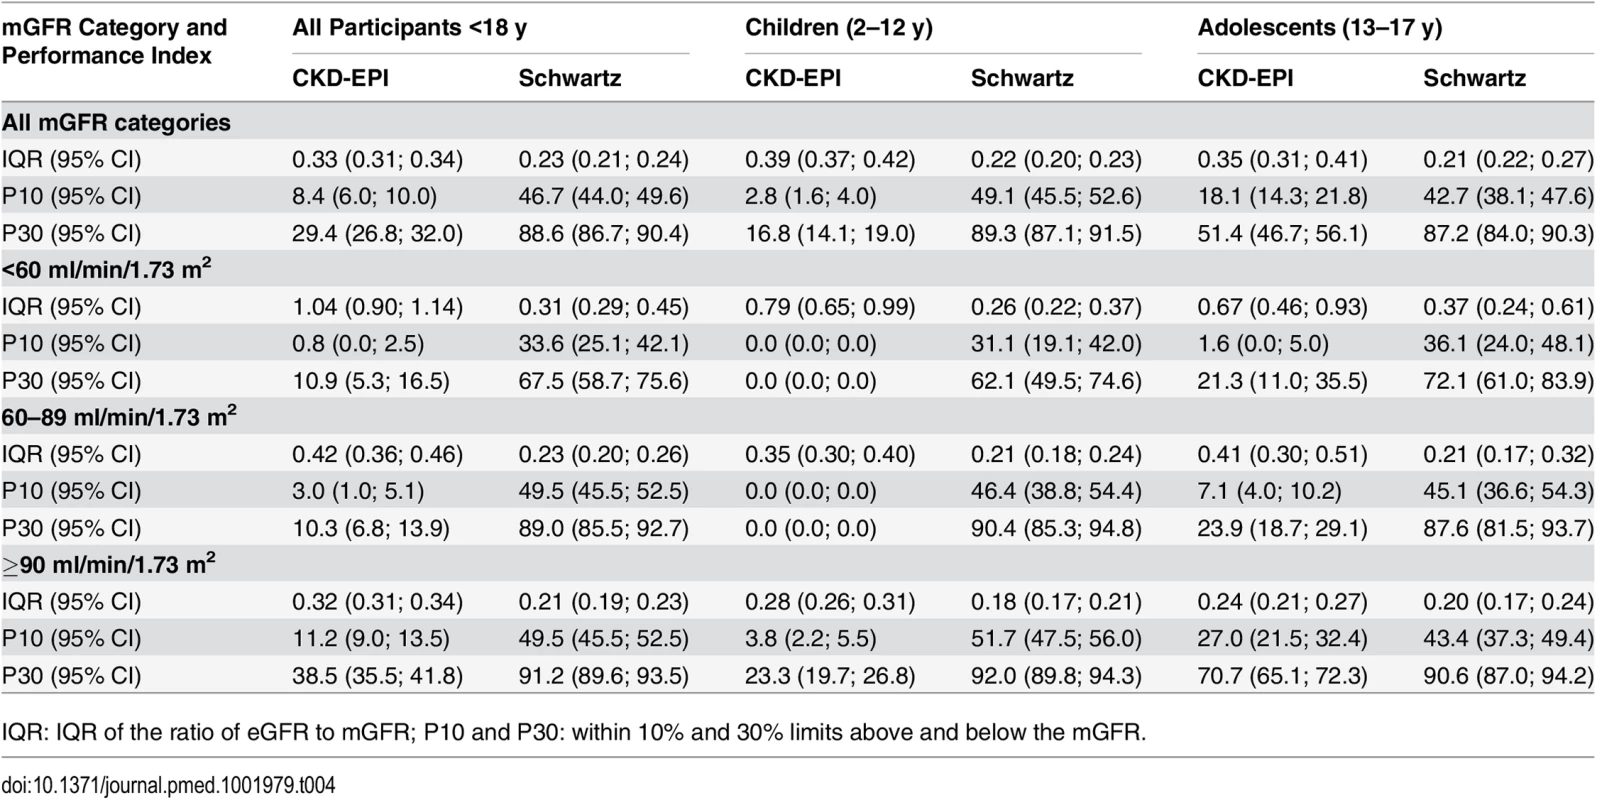 Precision and accuracy of the CKD-EPI and Schwartz equations according to age and mGFR in children and adolescents.